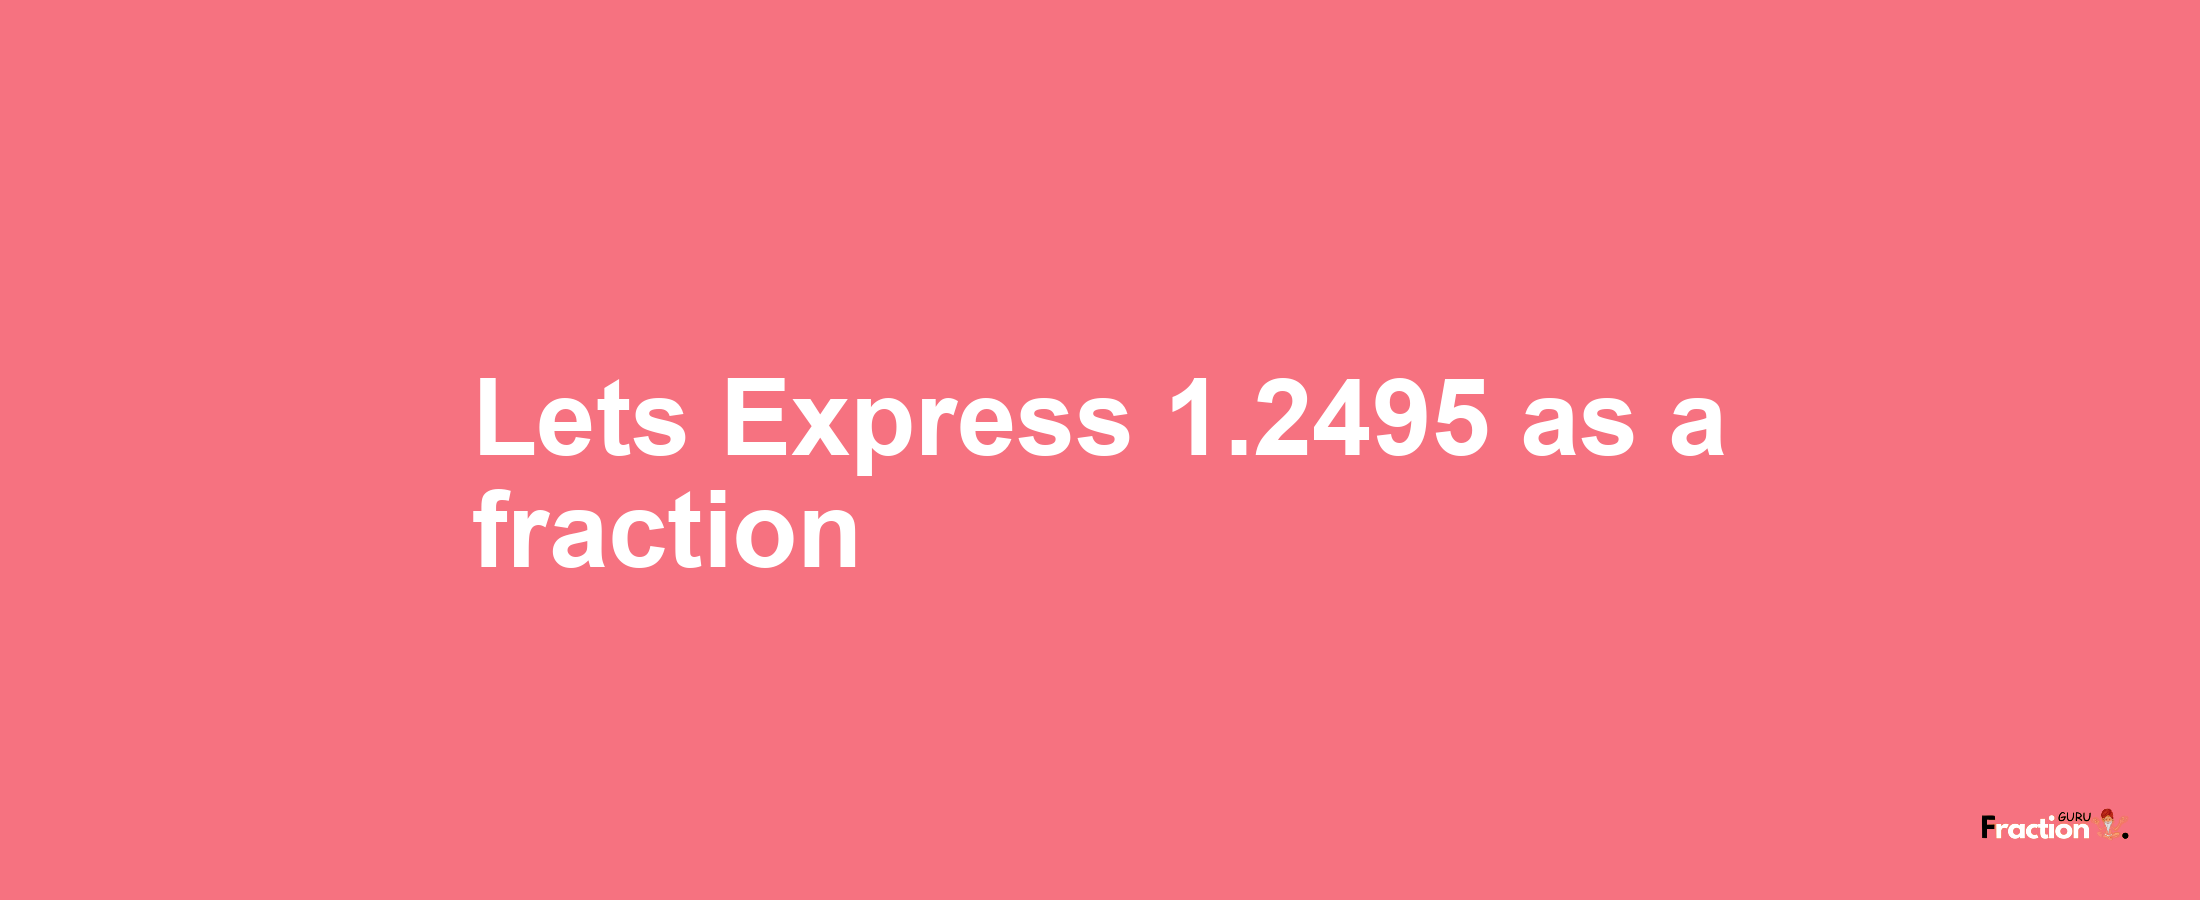 Lets Express 1.2495 as afraction